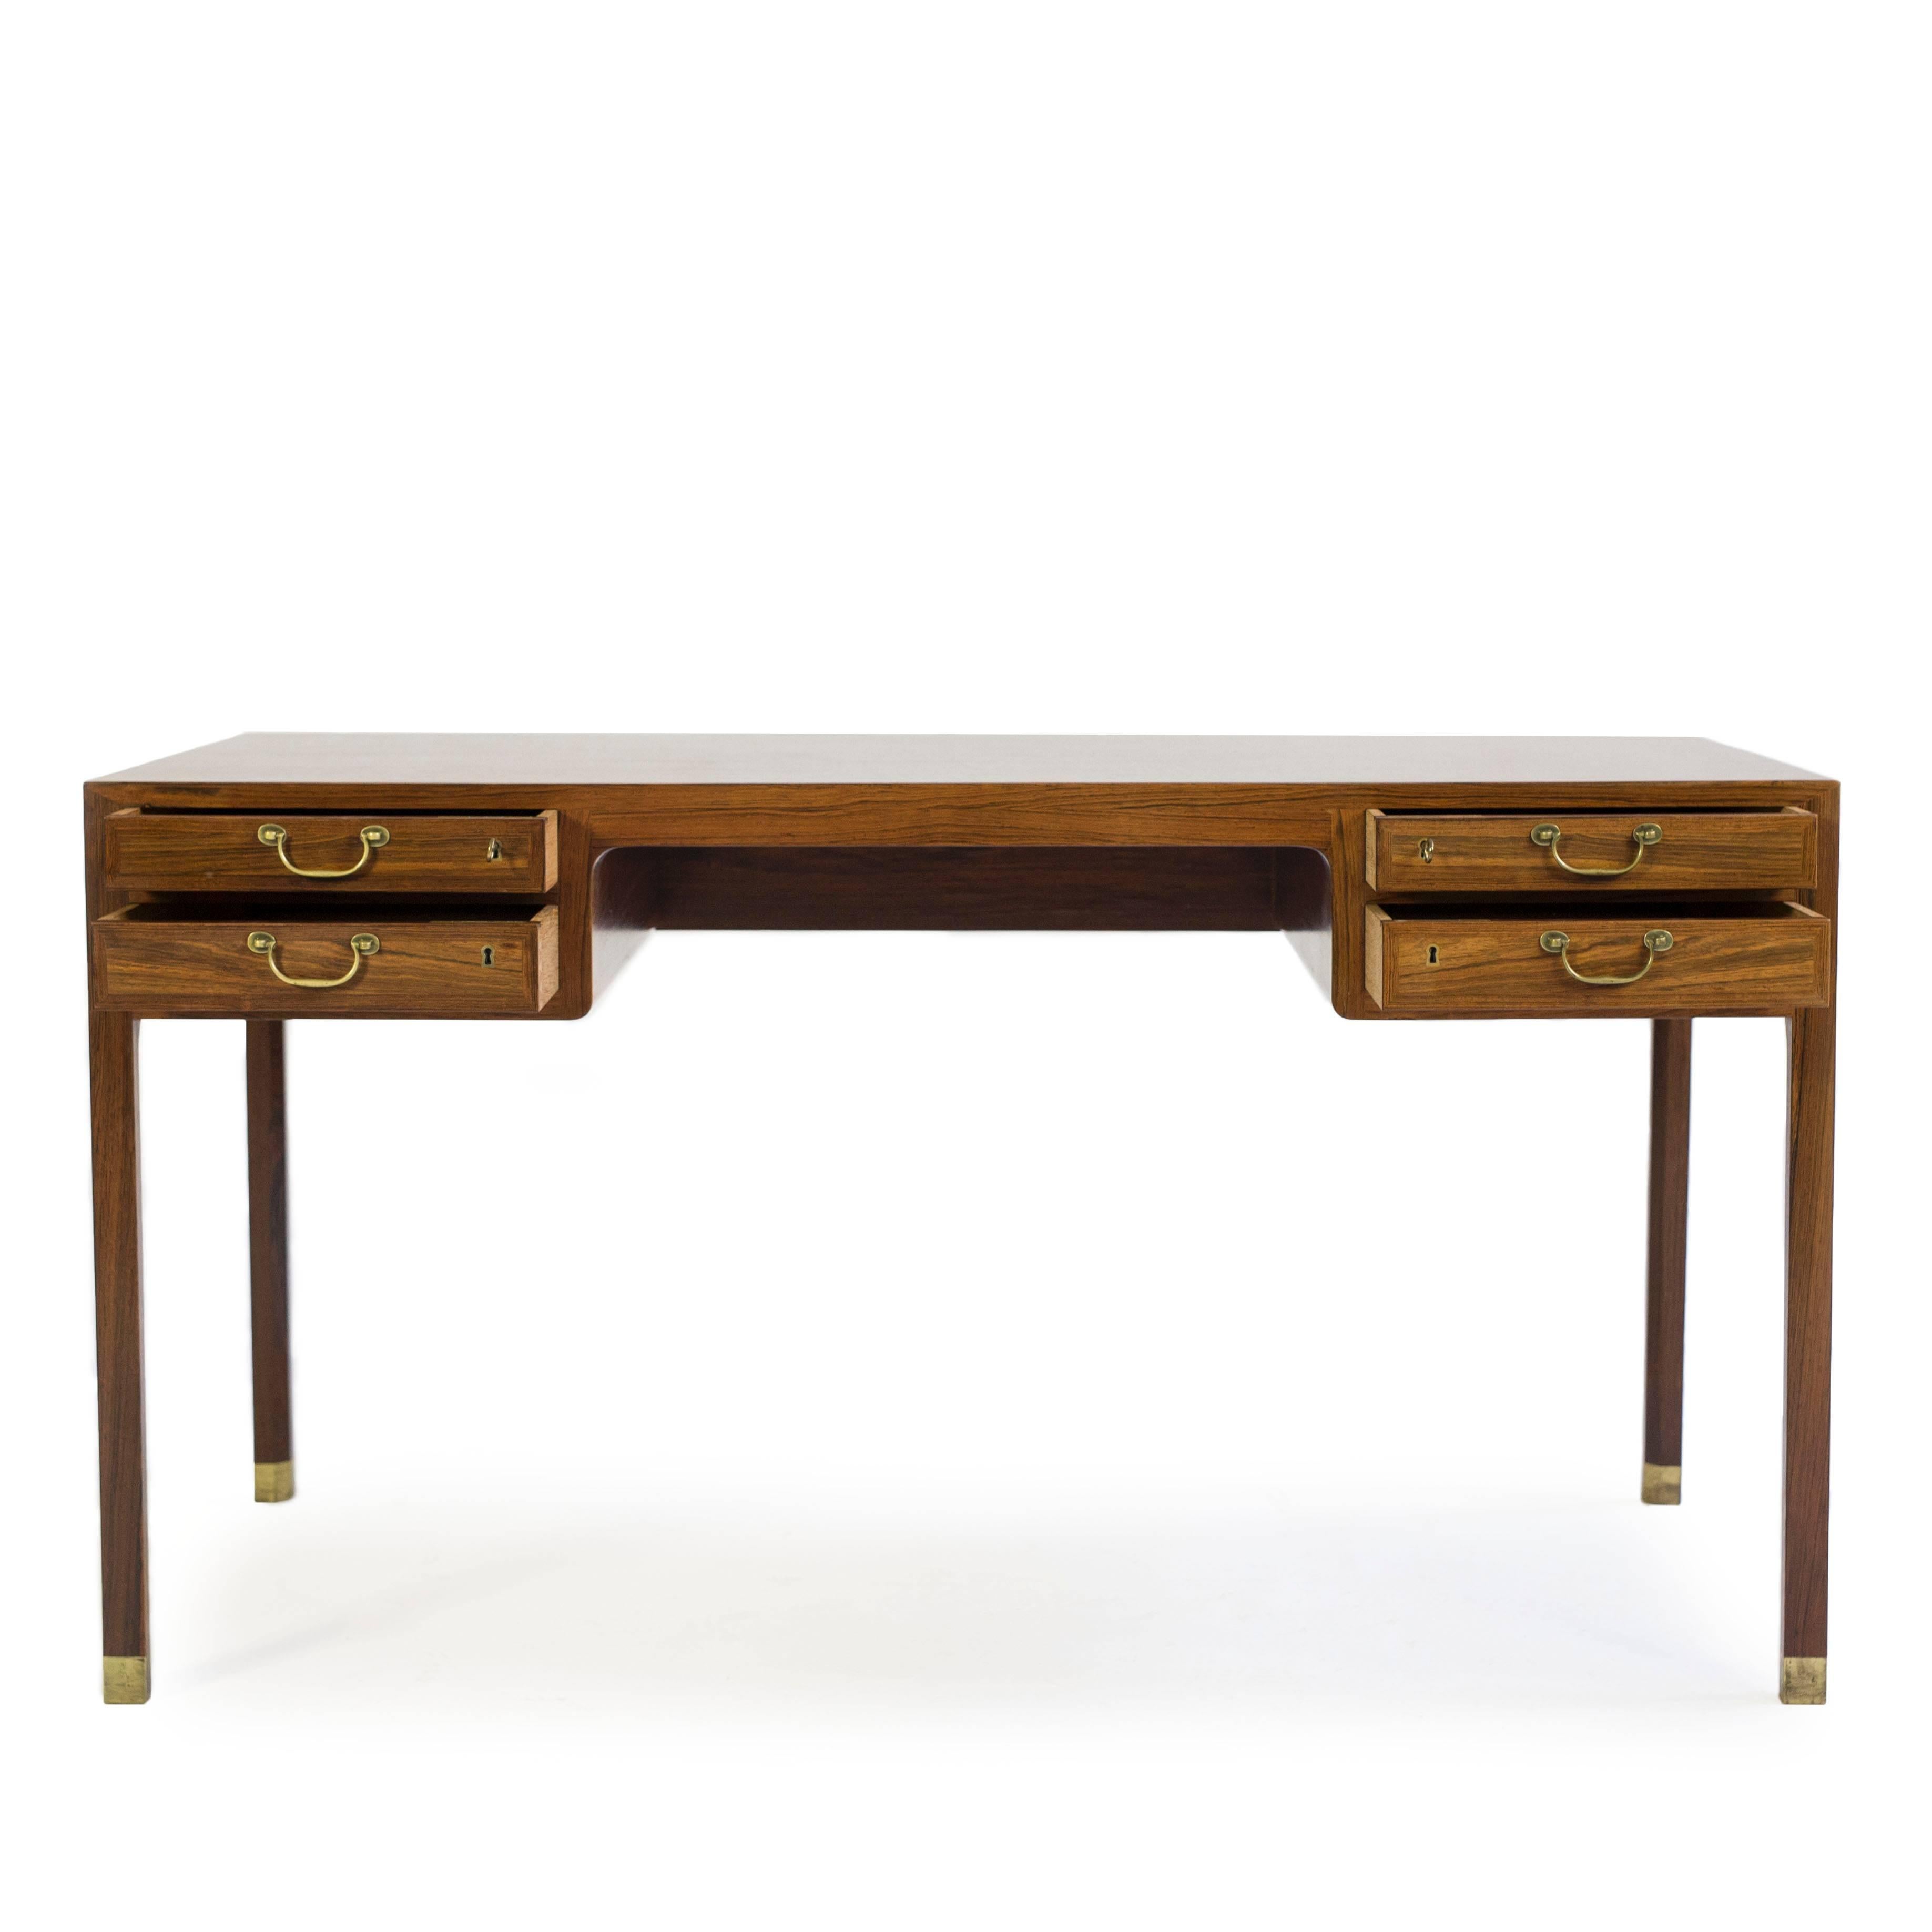 A freestanding Ole Wanscher Brazilian Rosewood desk with shoes and handles of brass. 

Executed by A. J. Iversen, Denmark 

Very fine condition.  